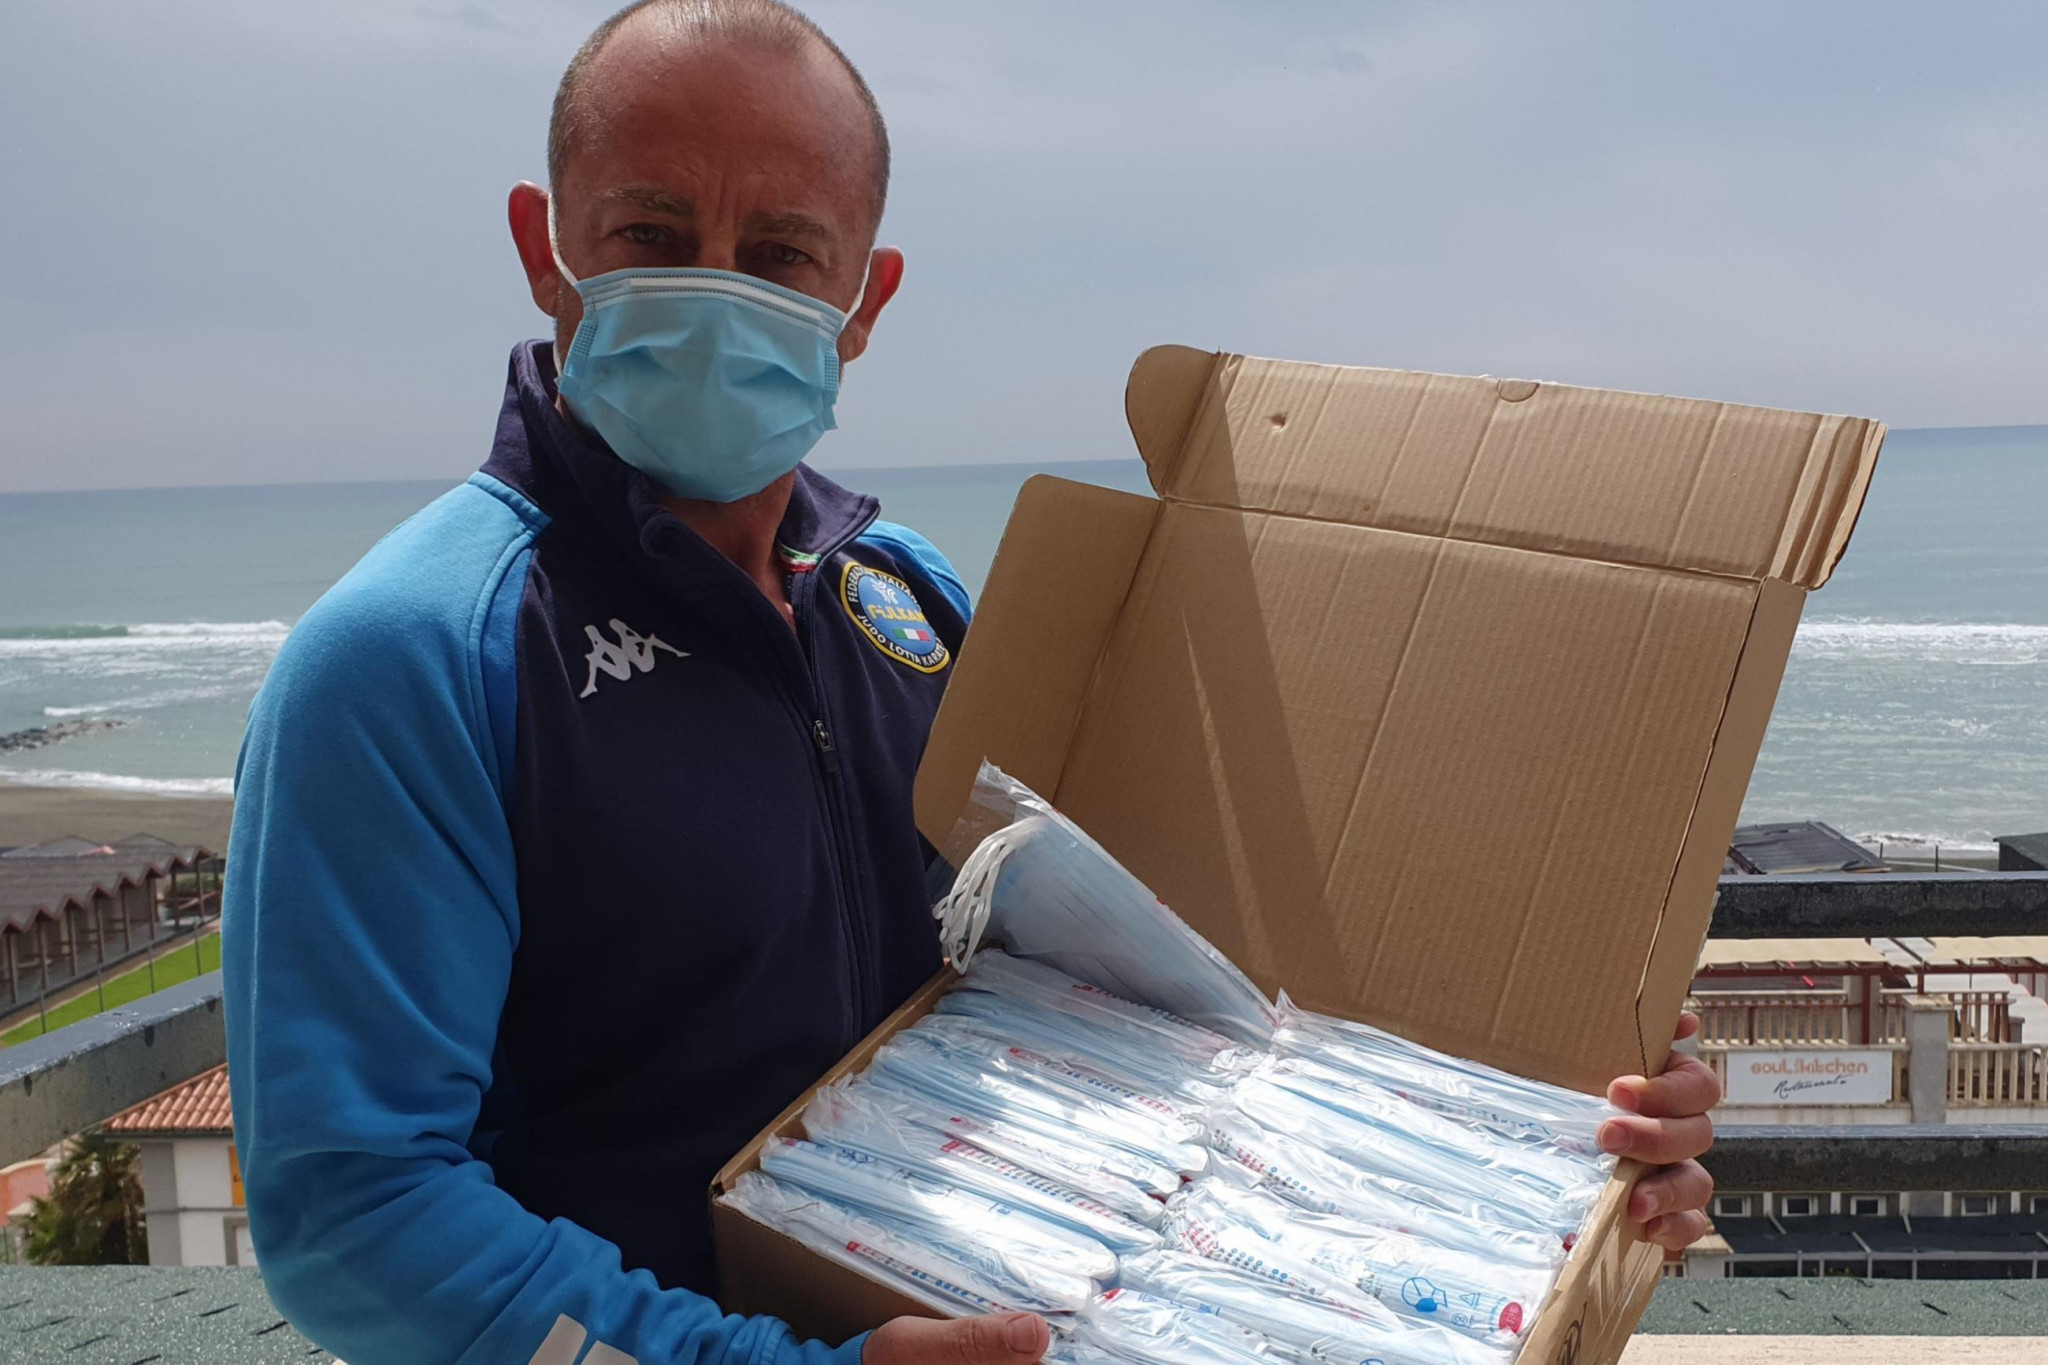 The UWW has sent masks to countries battling COVID-19 ©UWW